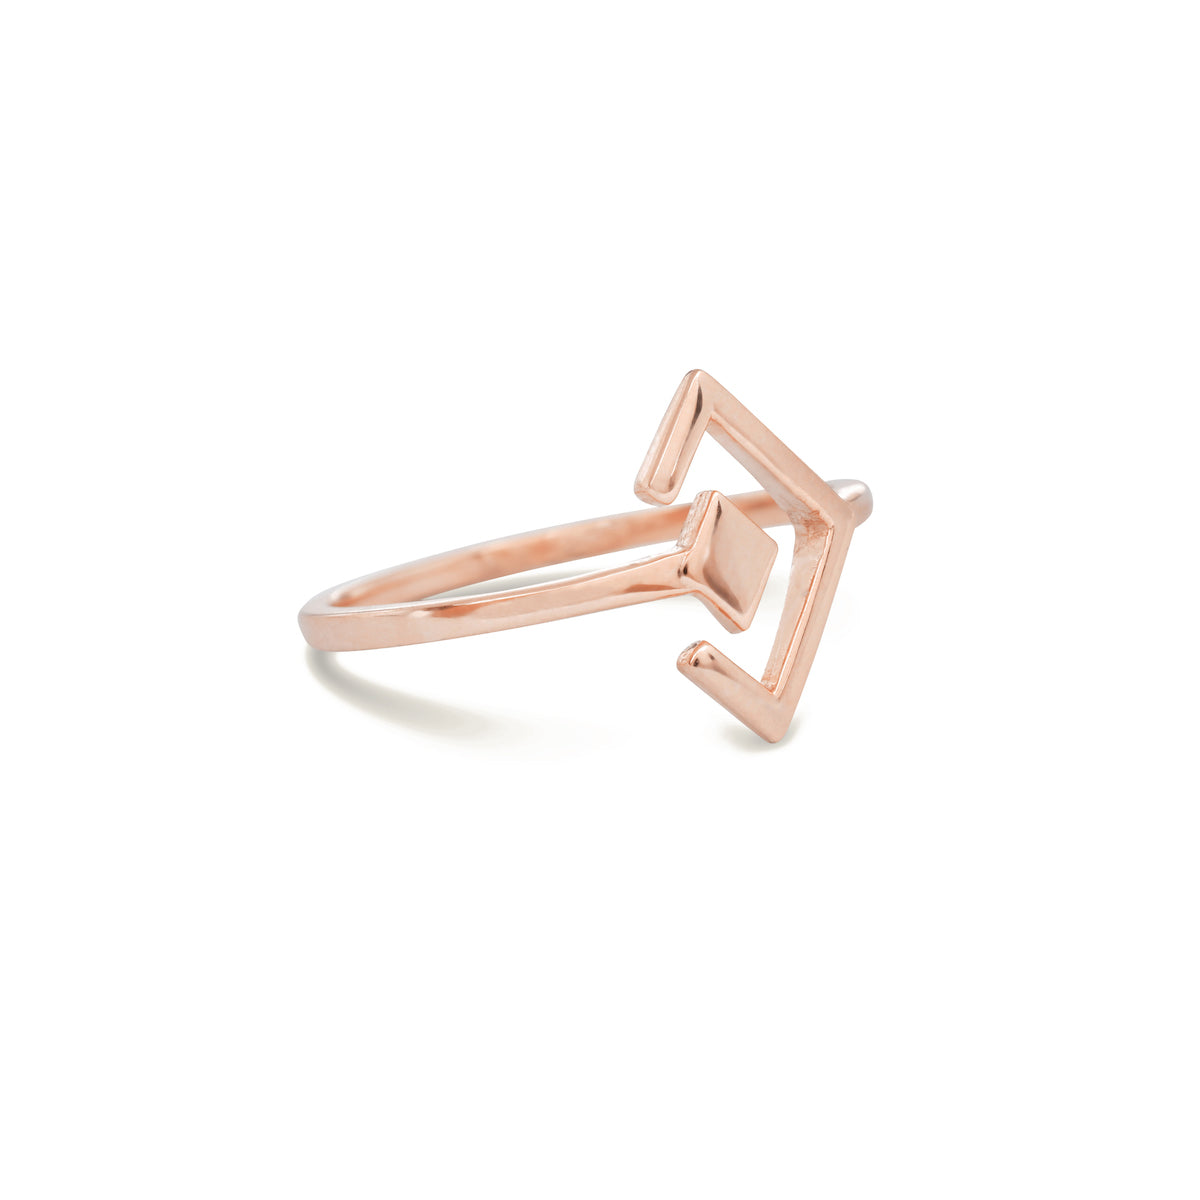 gold design ring for women in rose gold colour